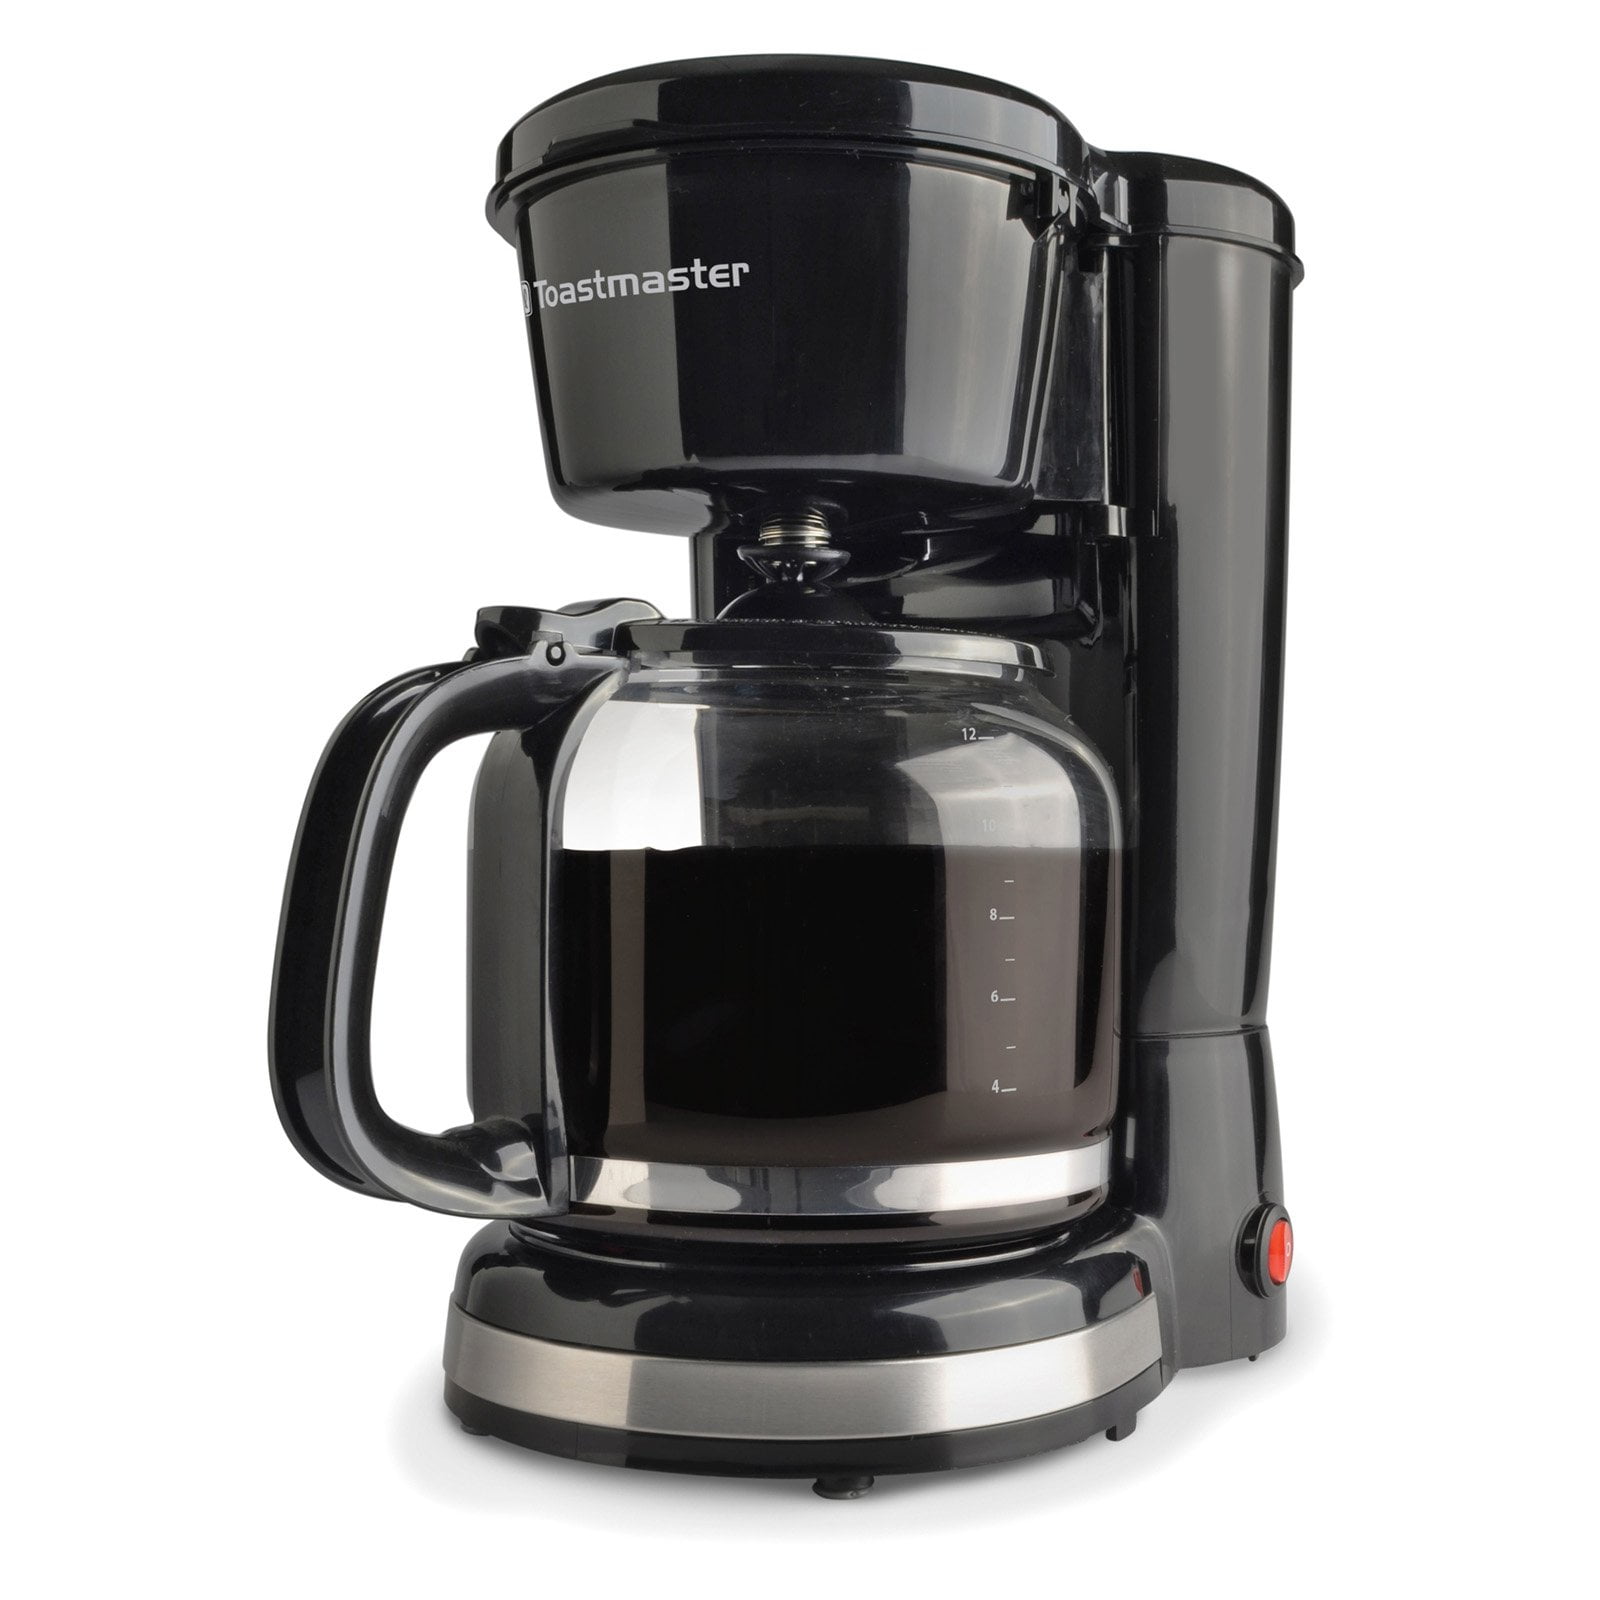 Coffee Carafe Replacement Compatible With Toastmaster